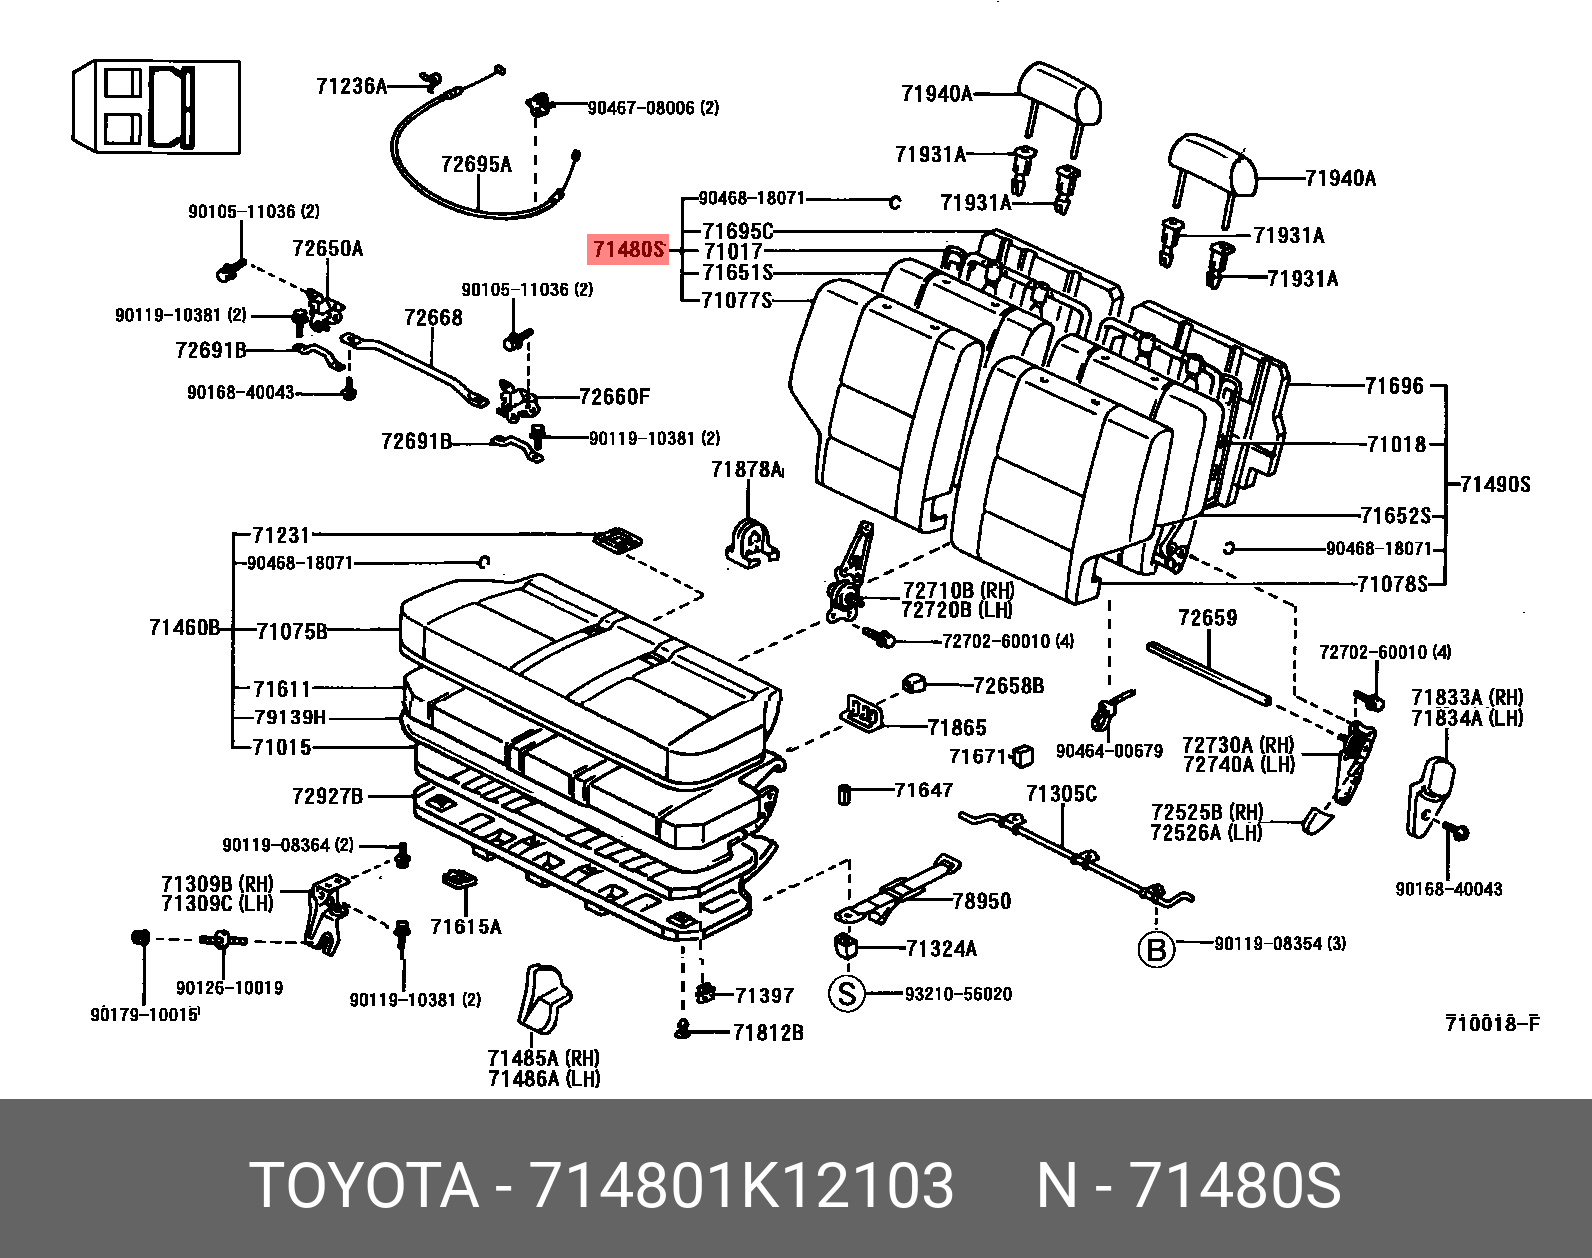 COROLLA LEVIN 198705 - 199106, BACK ASSY, REAR SEAT, RH (FOR SEPARATE TYPE)